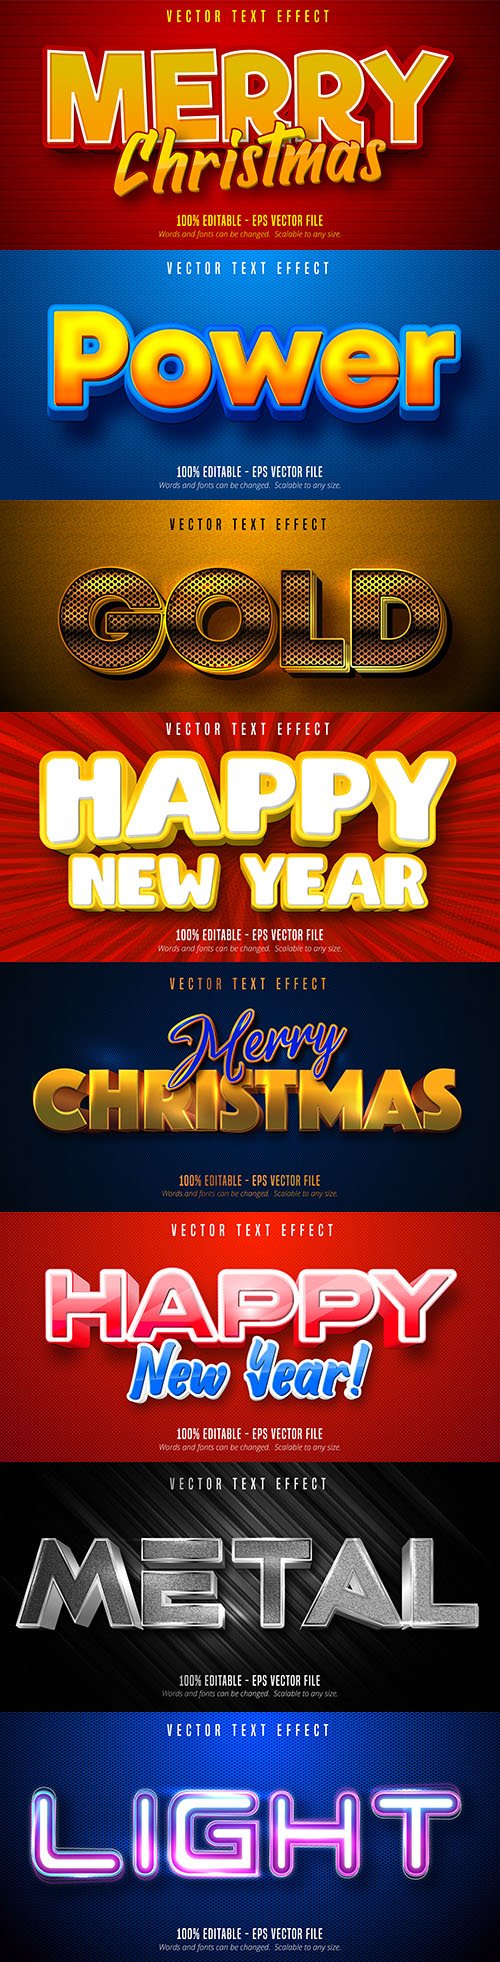 Merry Christmas editable font effect text collection illustration design 2